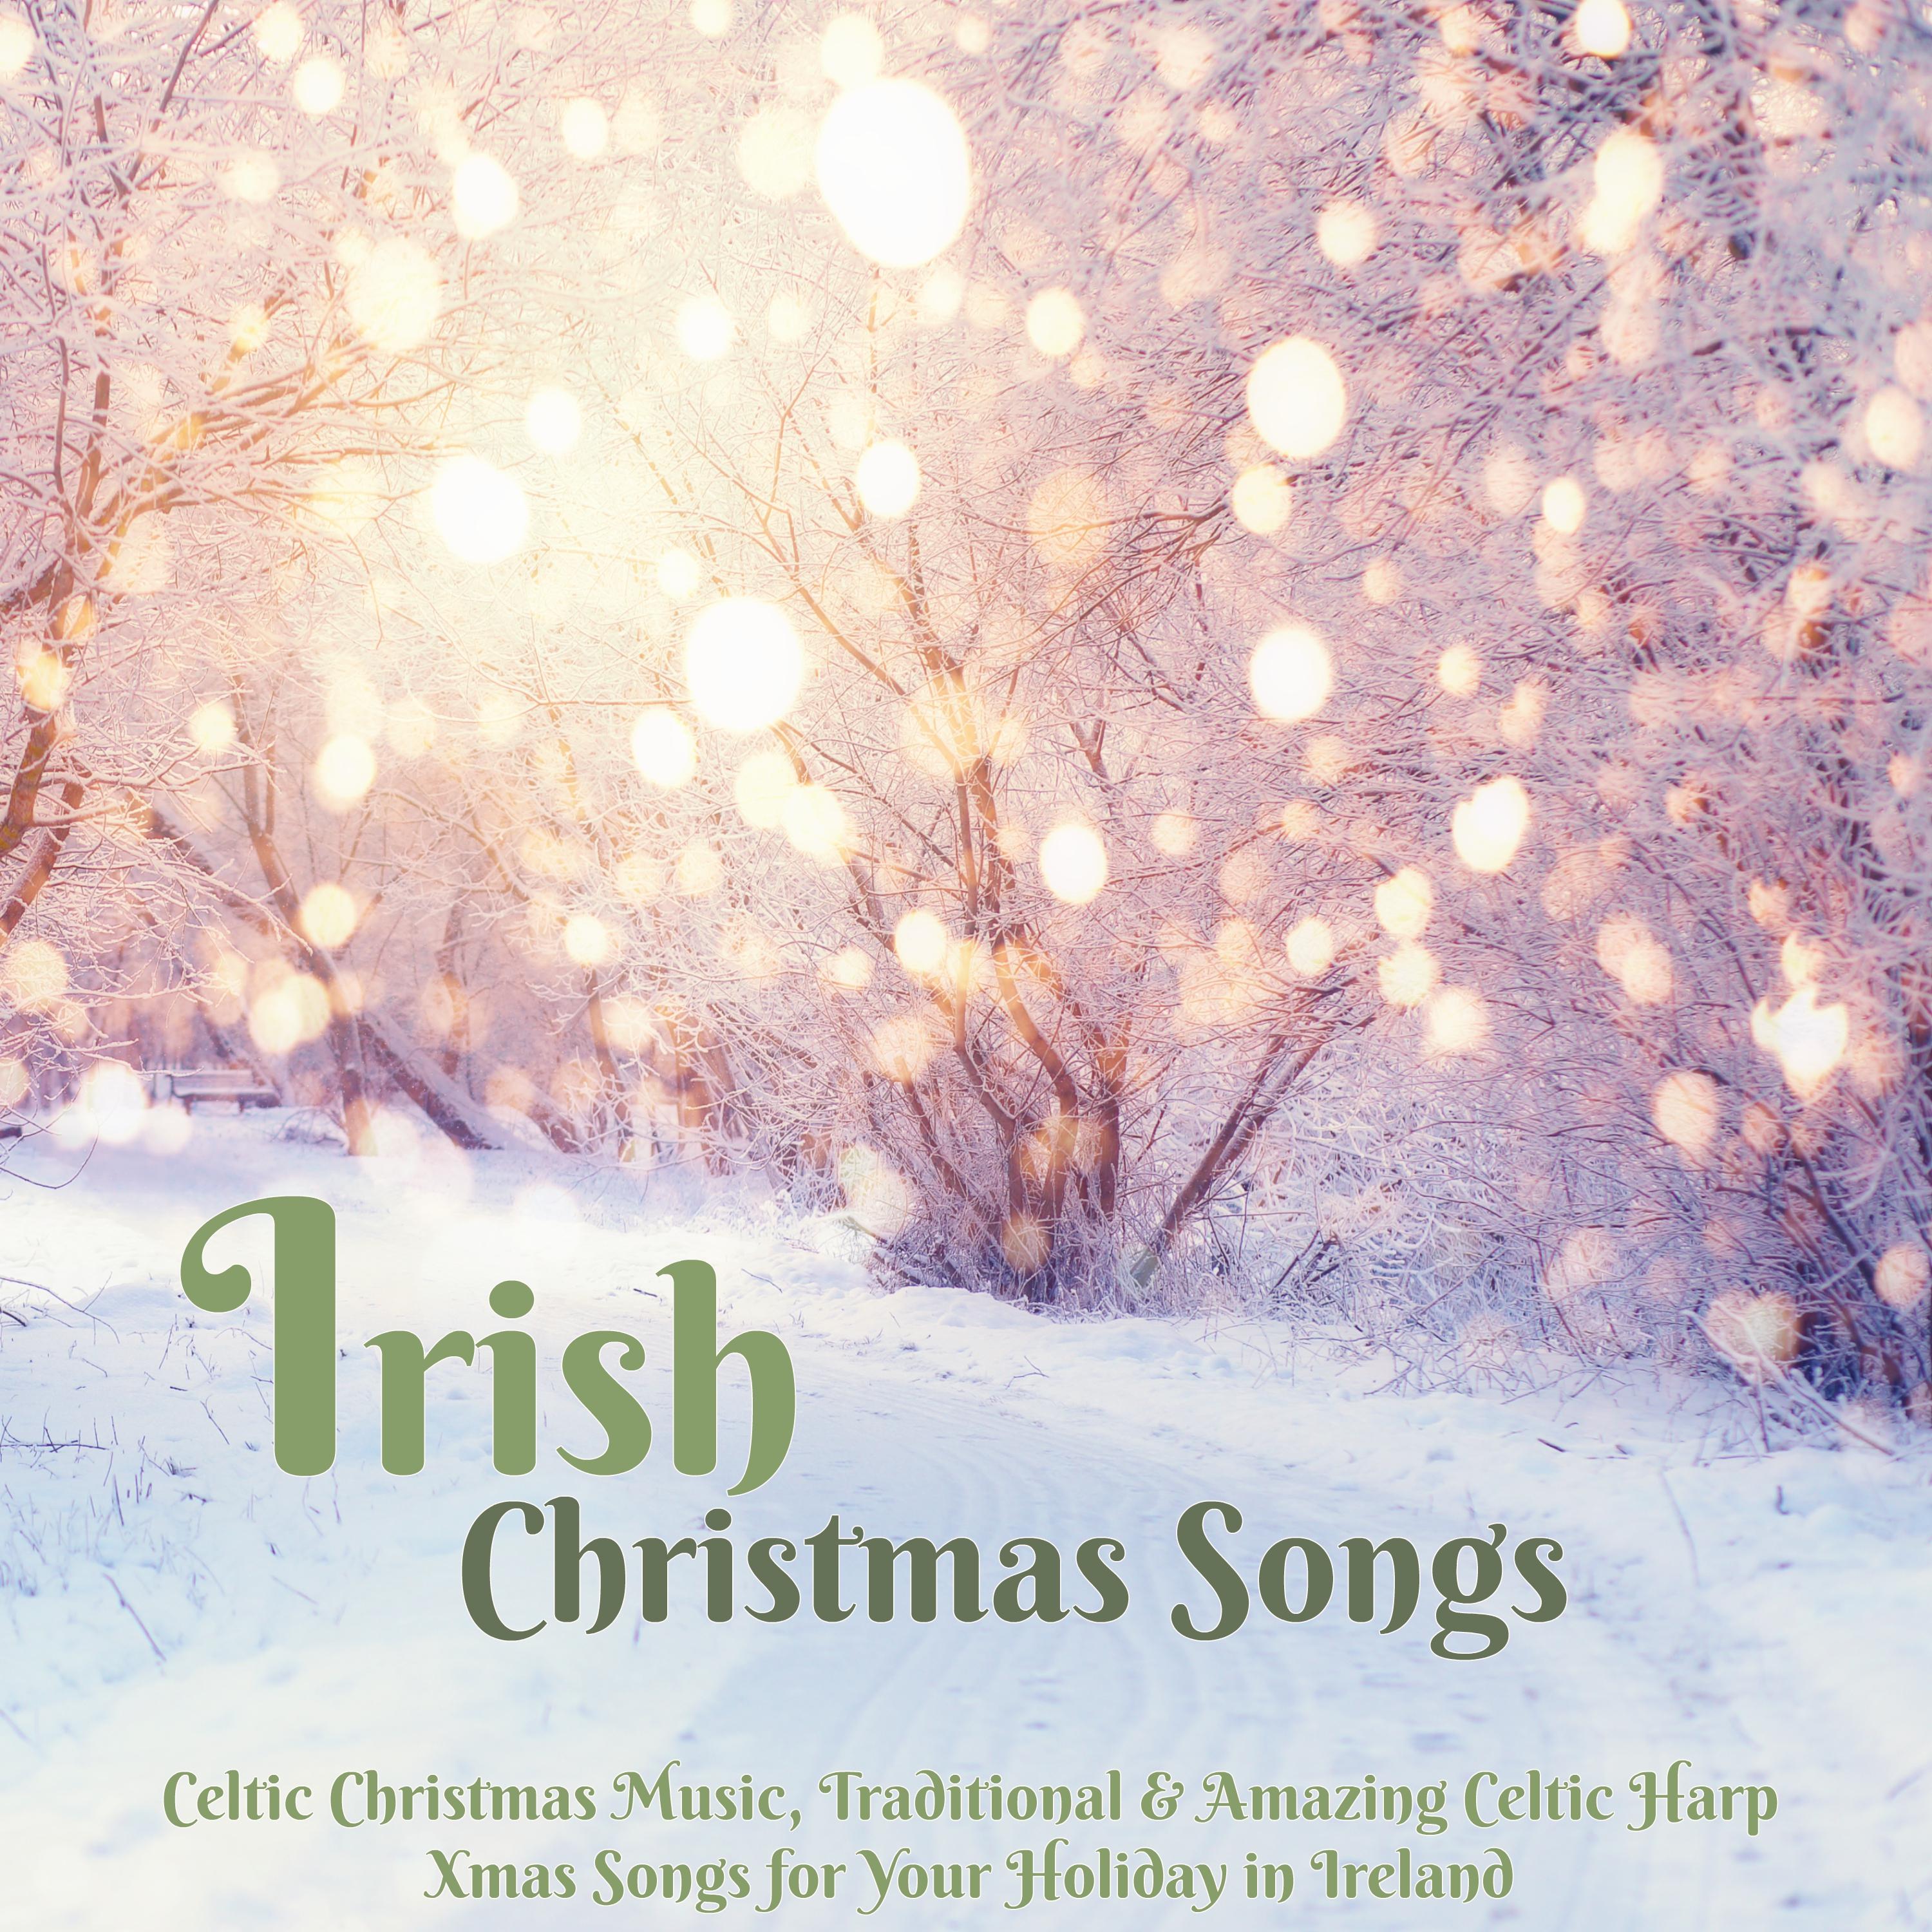 Irish Christmas Songs  Celtic Christmas Music, Traditional  Amazing Celtic Harp Xmas Songs for Your Holiday in Ireland